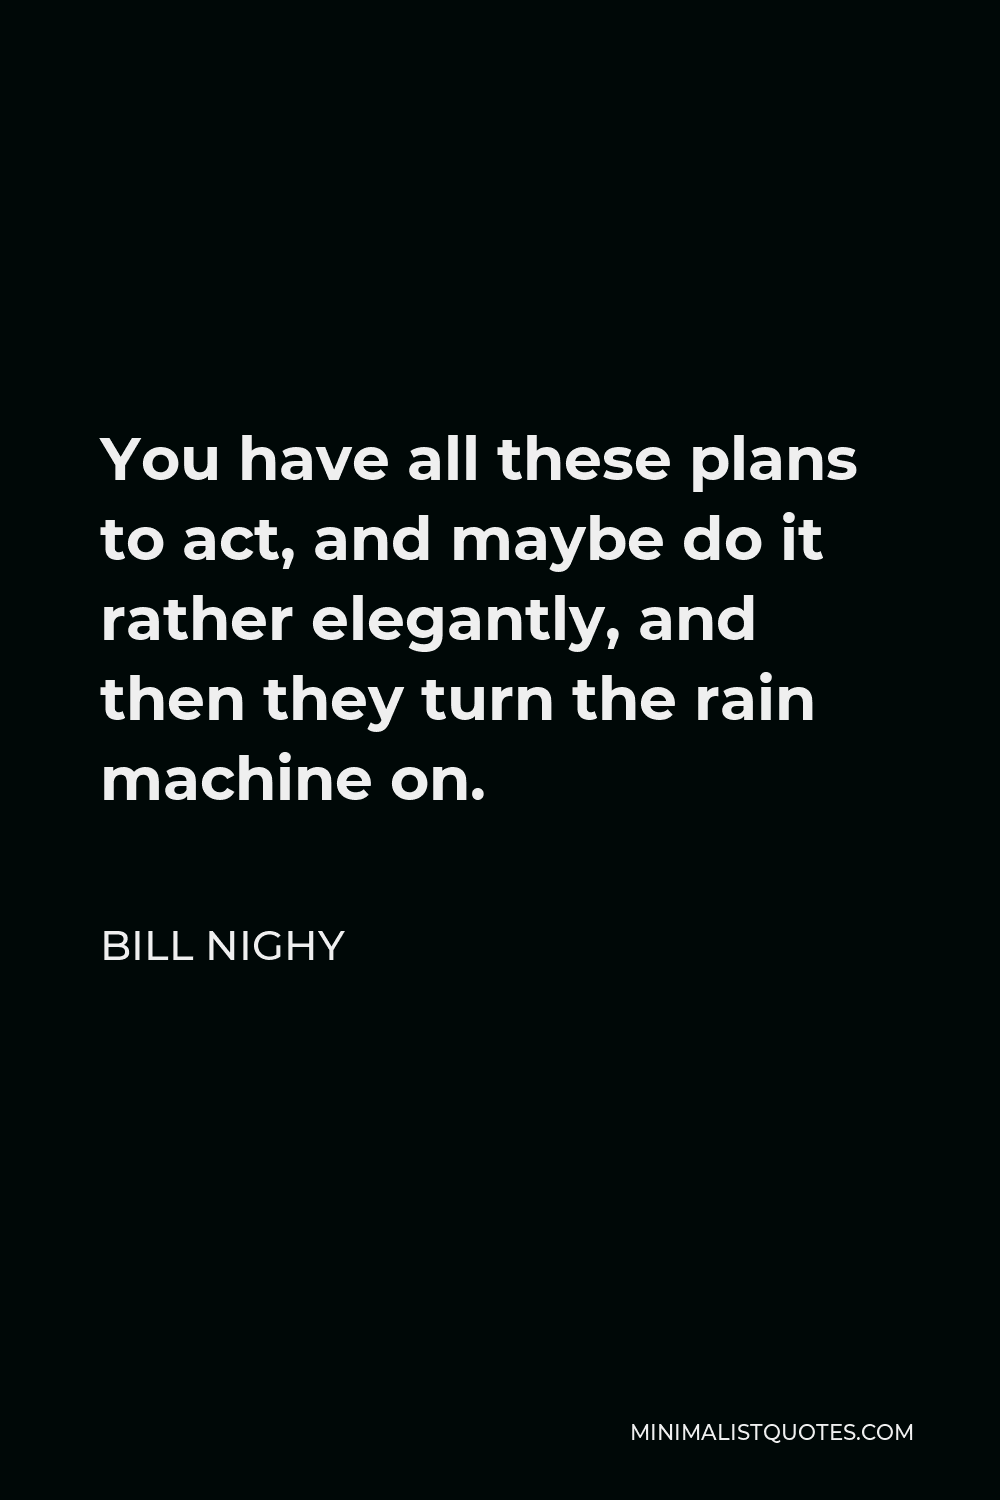 Bill Nighy Quote - You have all these plans to act, and maybe do it rather elegantly, and then they turn the rain machine on.